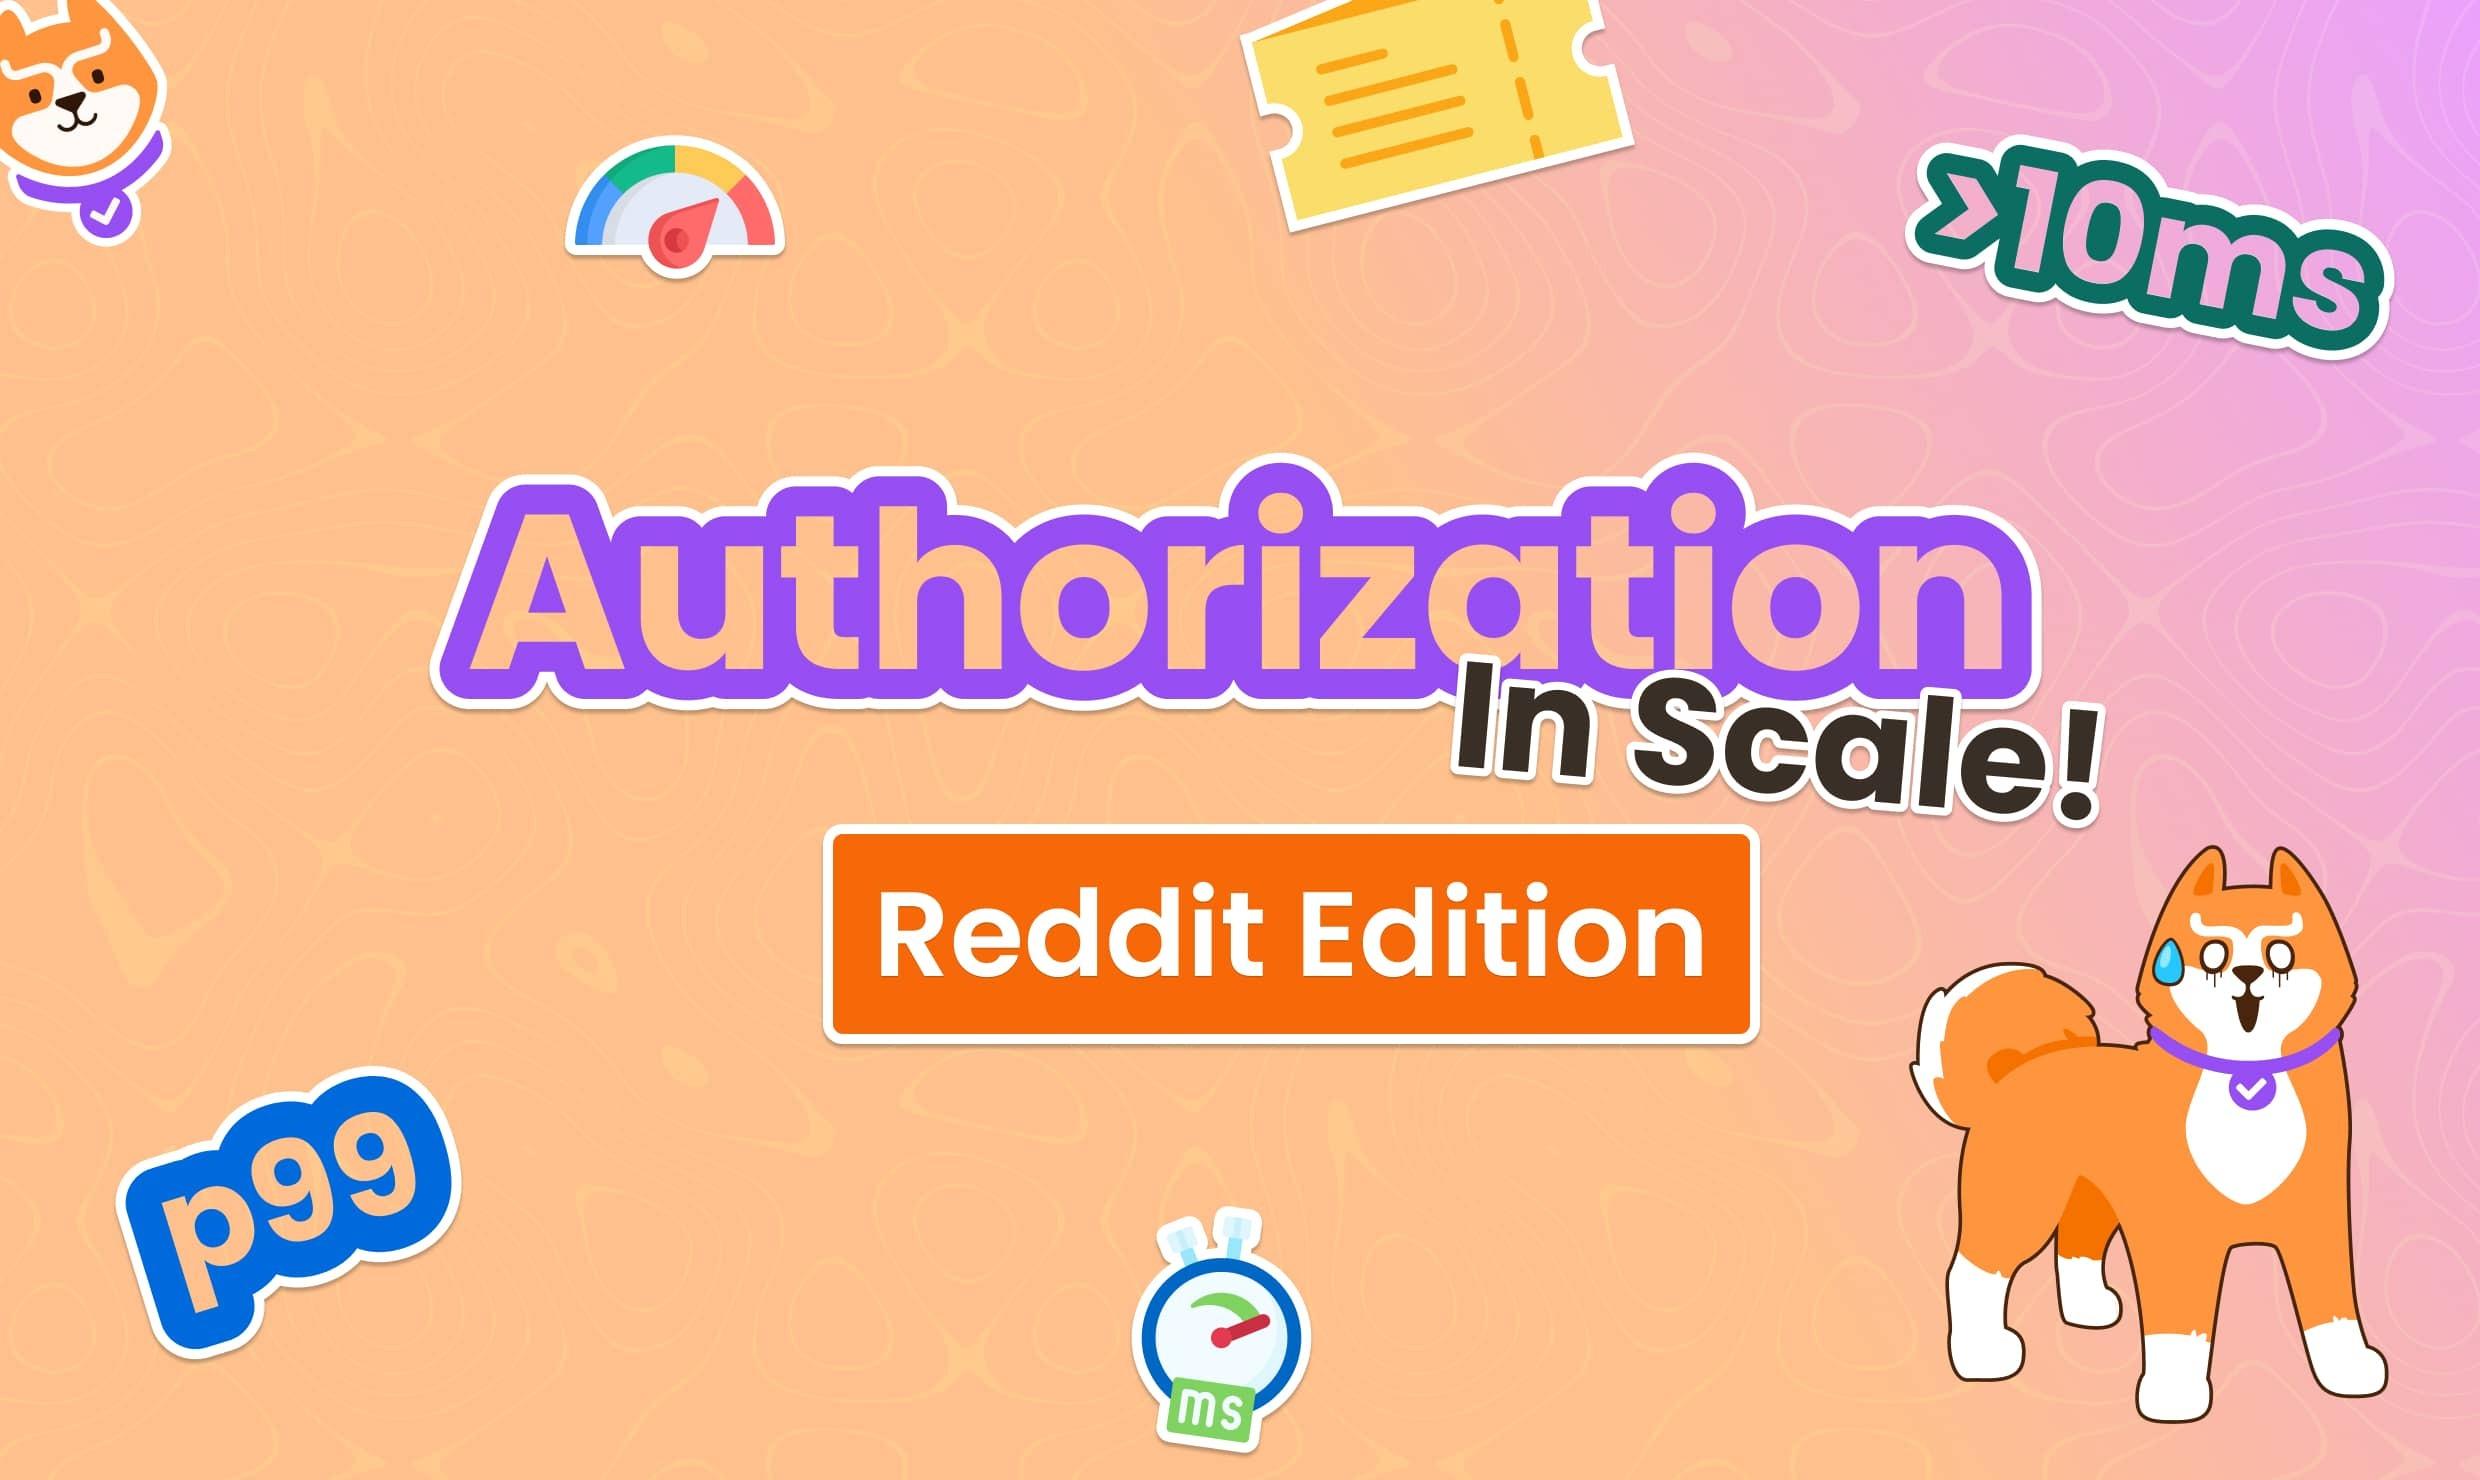 How Reddit Scaled to Millions of Decisions Per Second